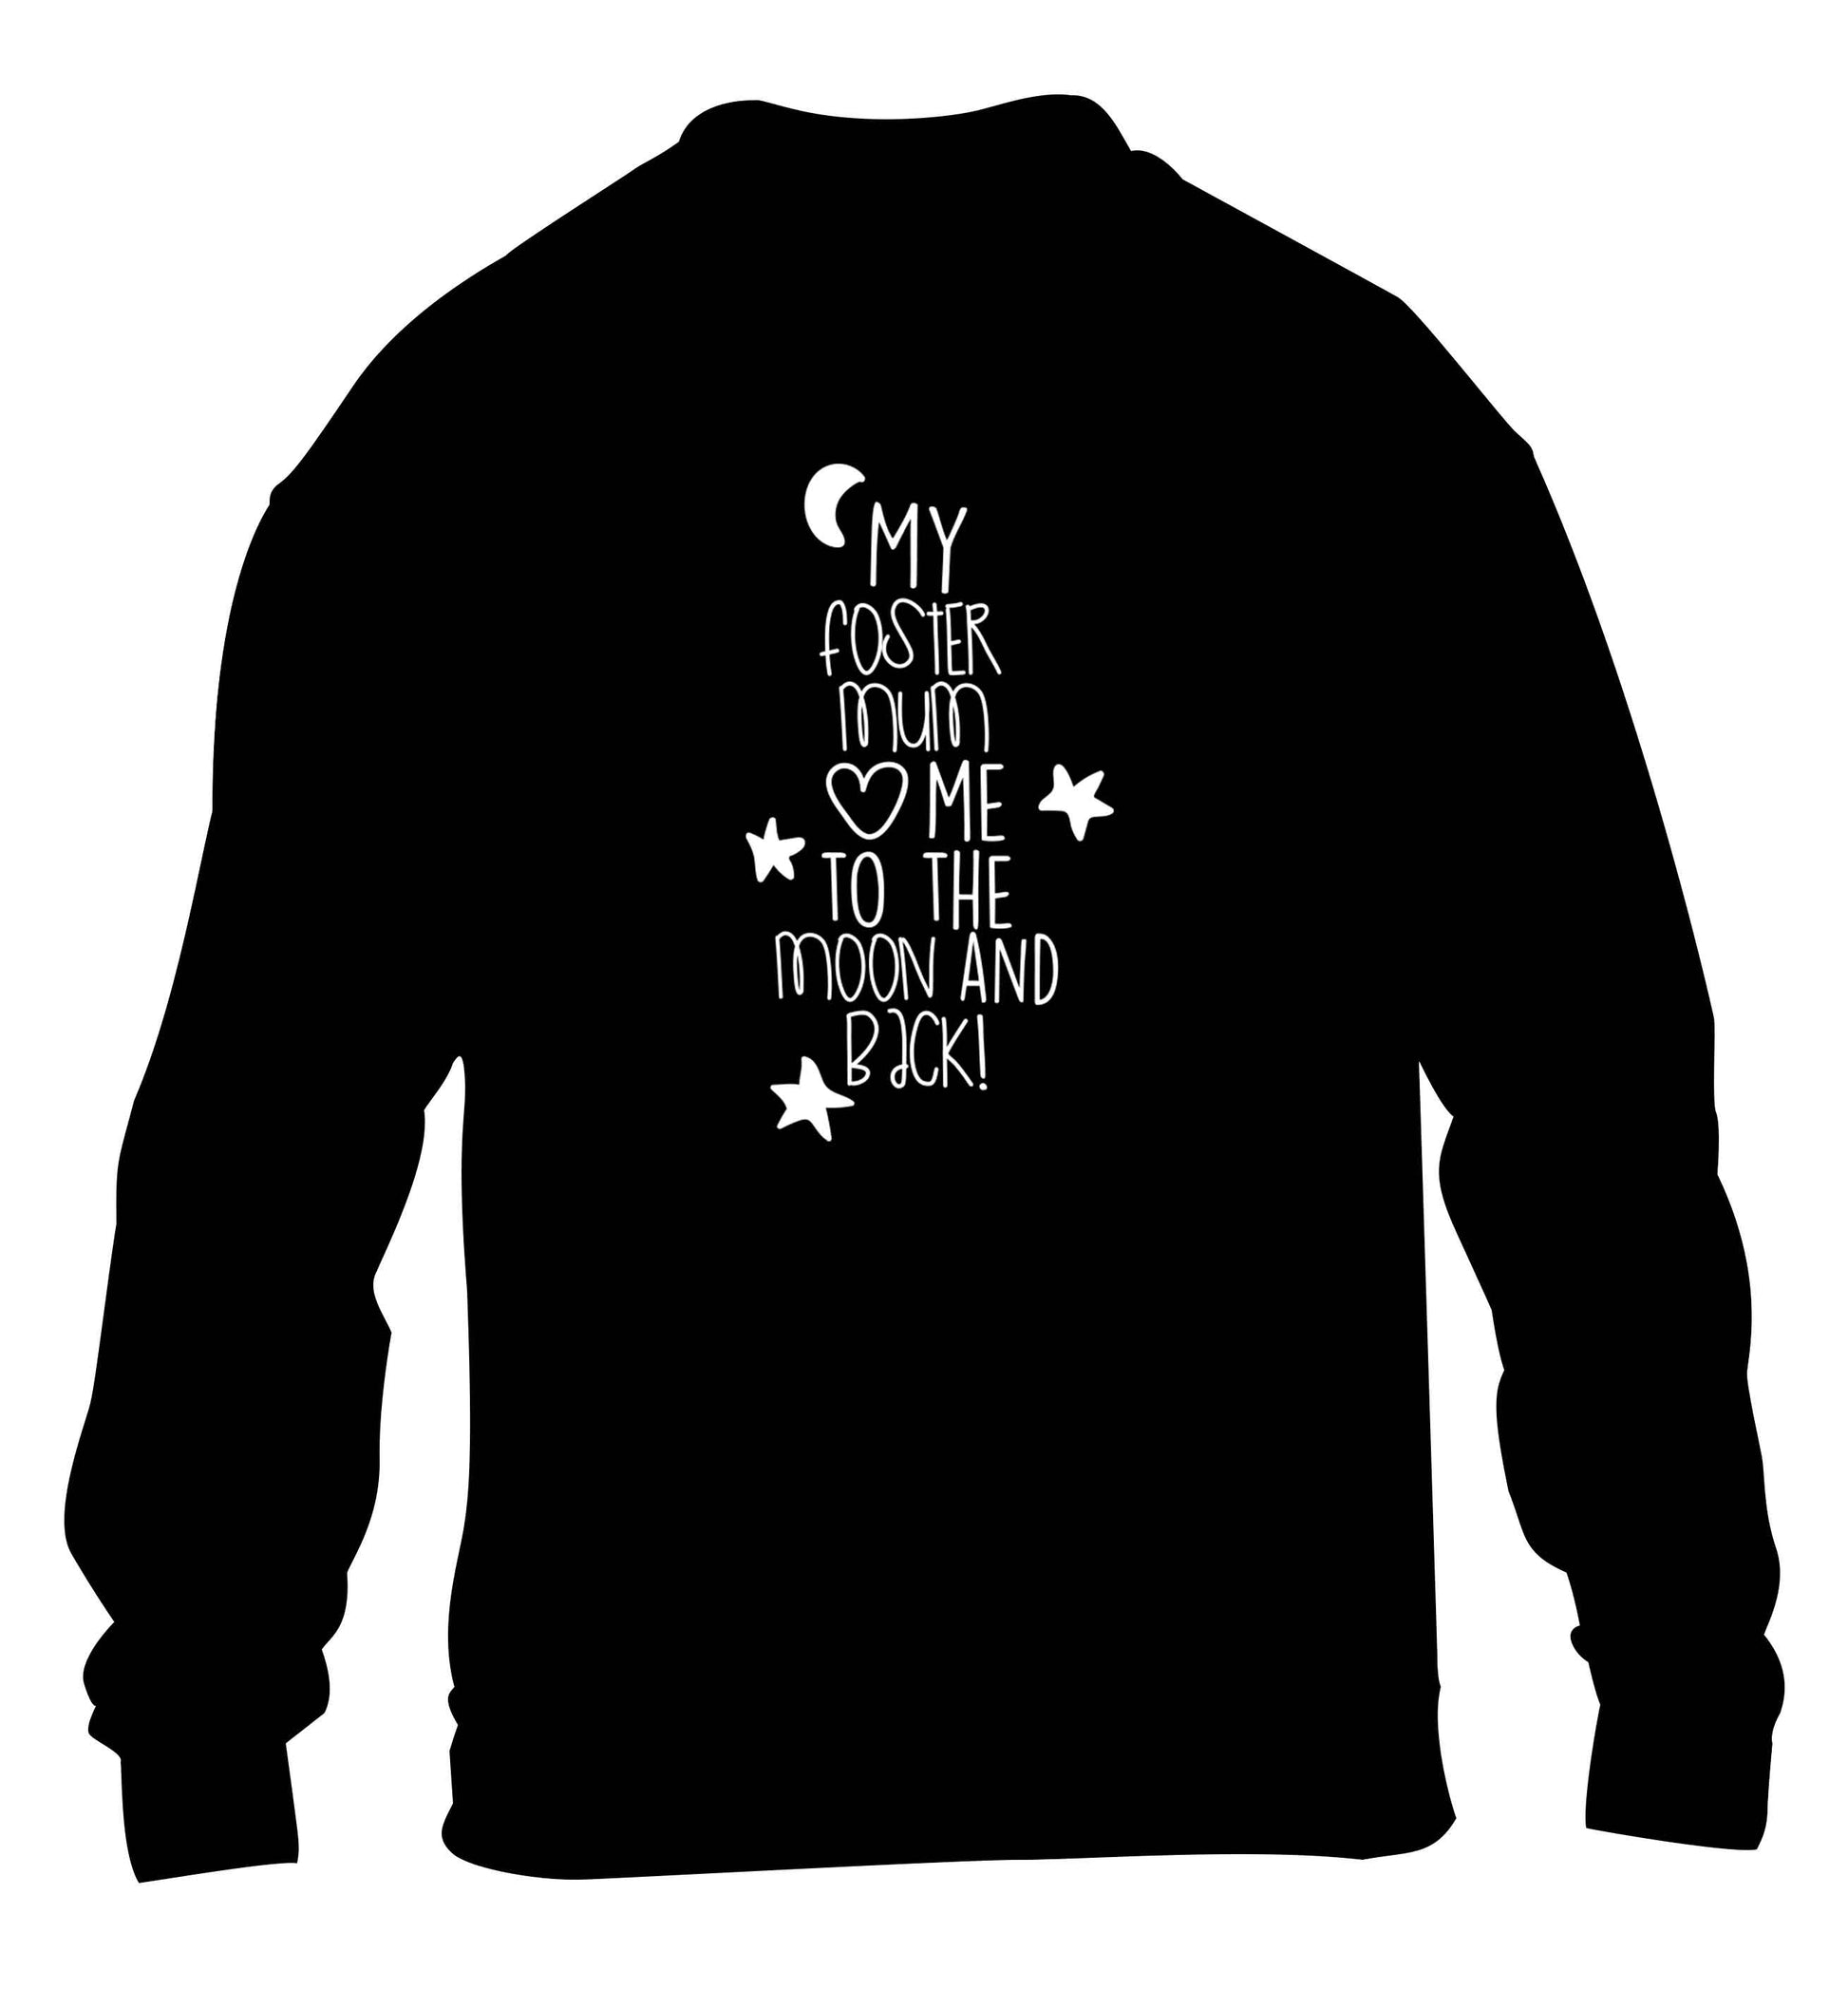 My foster mum loves me to the moon and back children's black sweater 12-13 Years